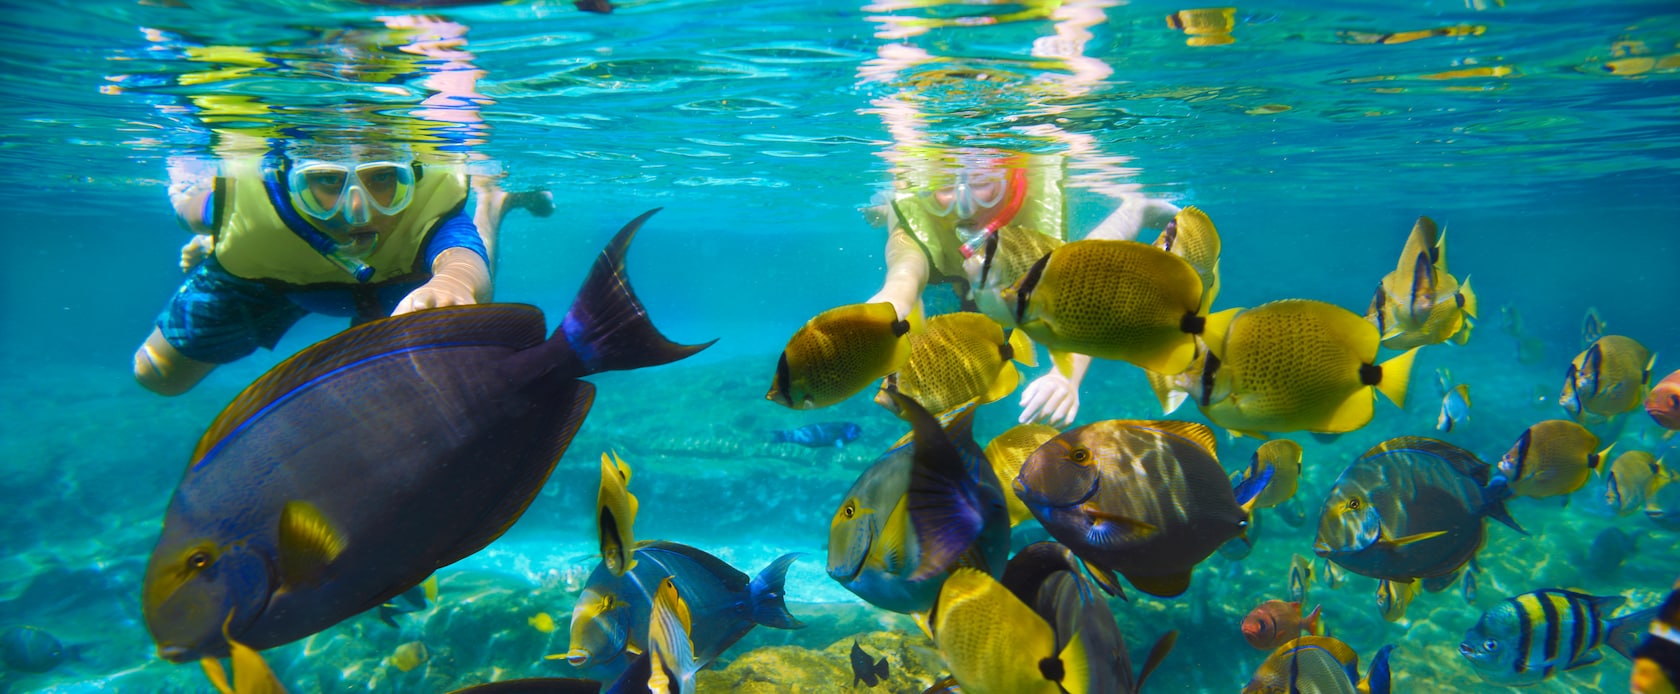 Young Guests swim toward a school of tropical fish while snorkeling in the waters of Rainbow Reef